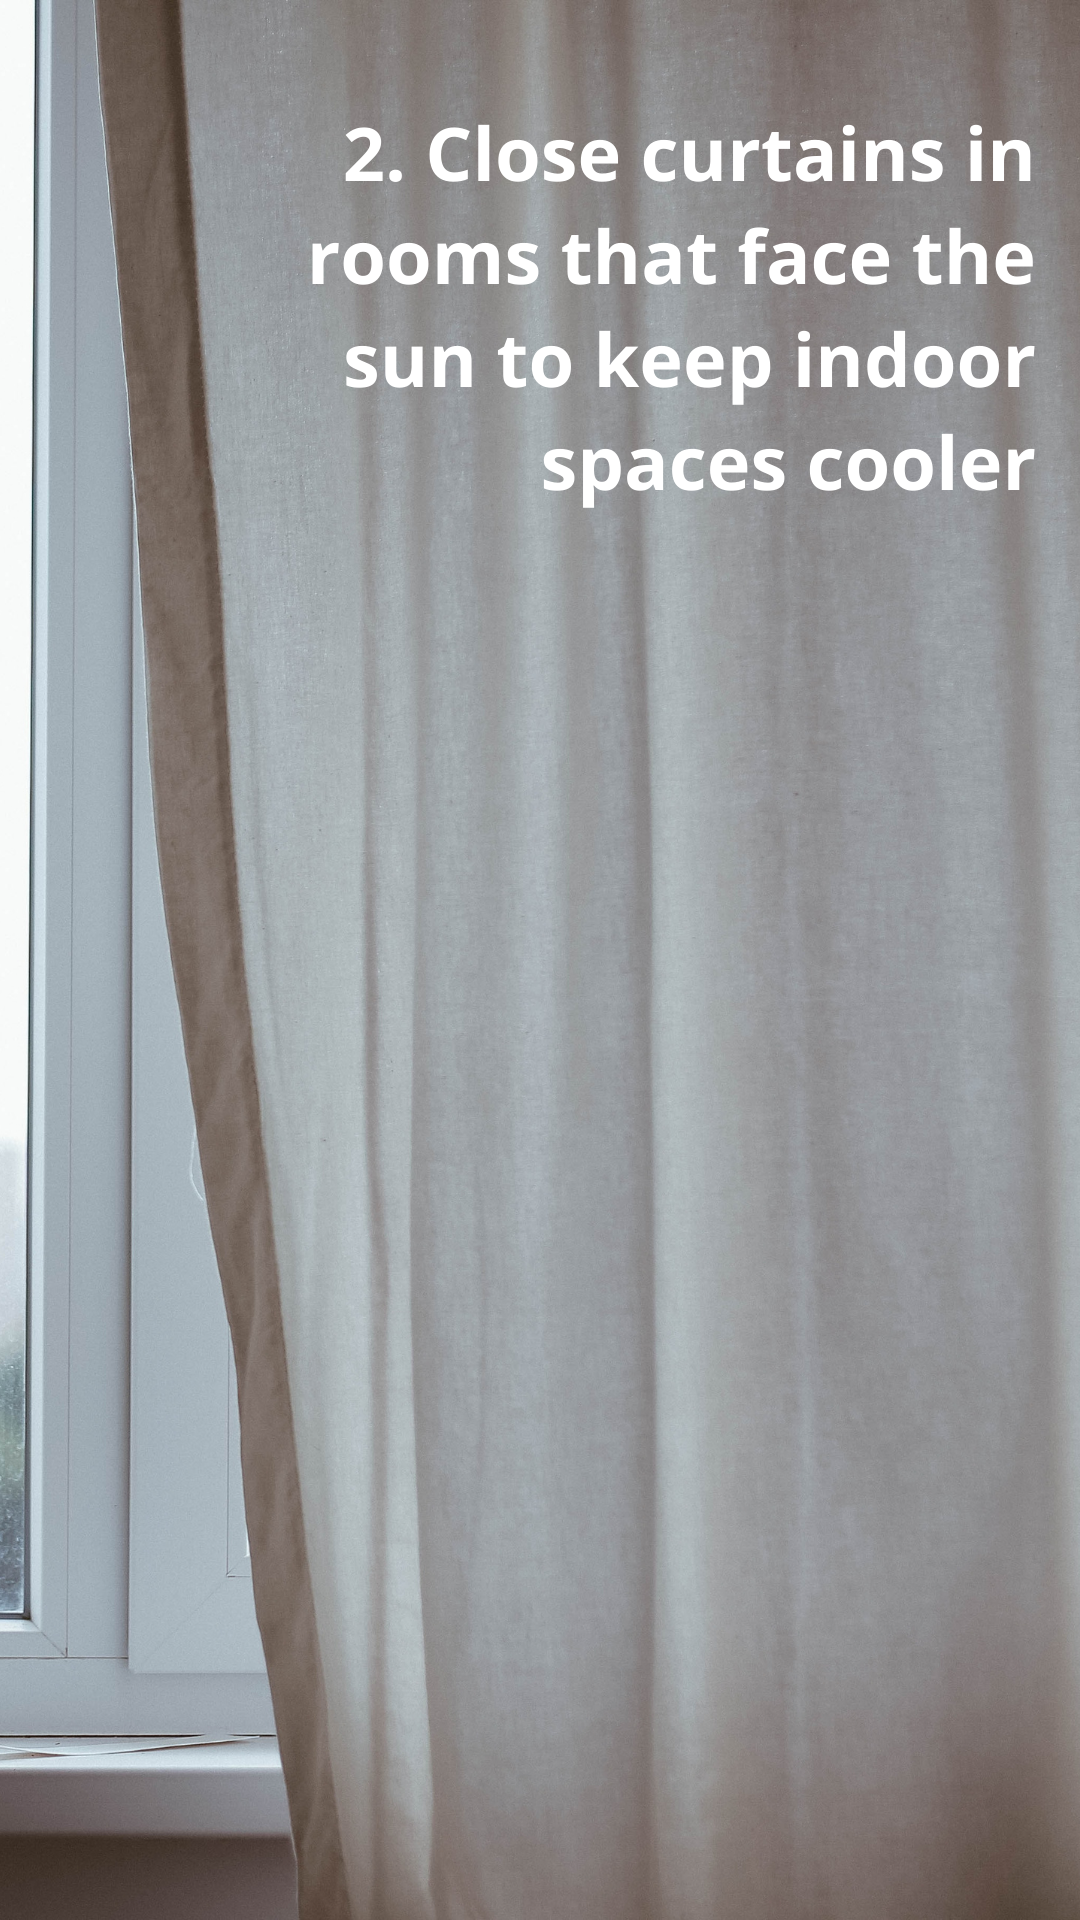 2. Close curtains in rooms that face the sun to keep indoor spaces cooler (photo of closed curtains)